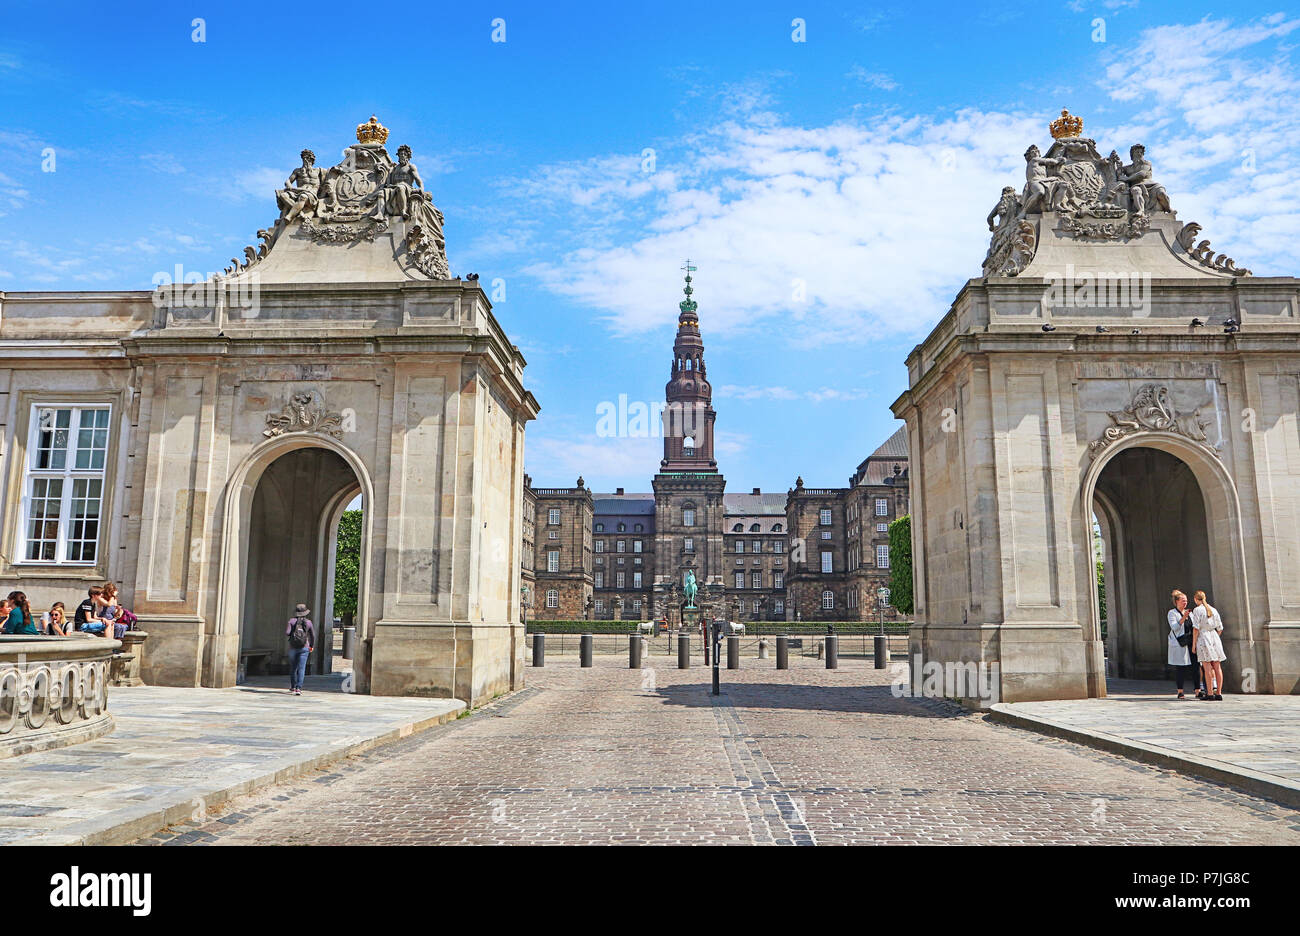 COPENHAGEN, DENMARK - MAY 17, 2018 Entrance to Christianborg Palace,house of the Danish Parliament, through the cobbled Marble Bridge over Frederiksho Stock Photo